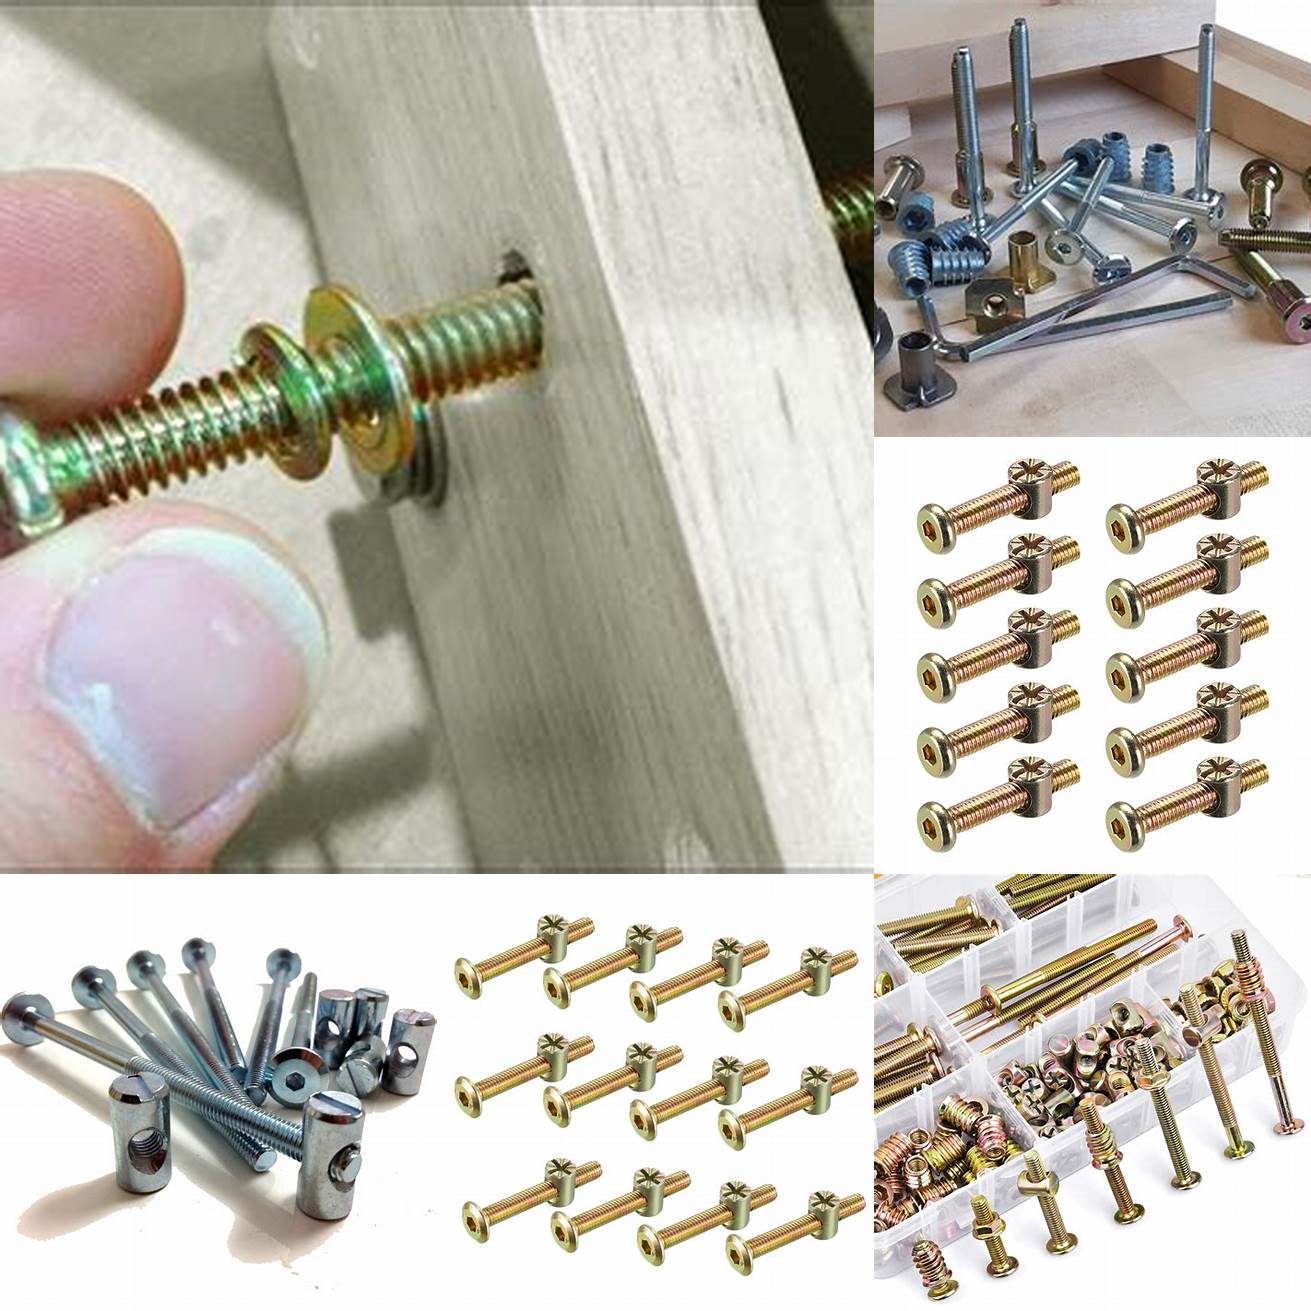 Check for loose bolts or screws